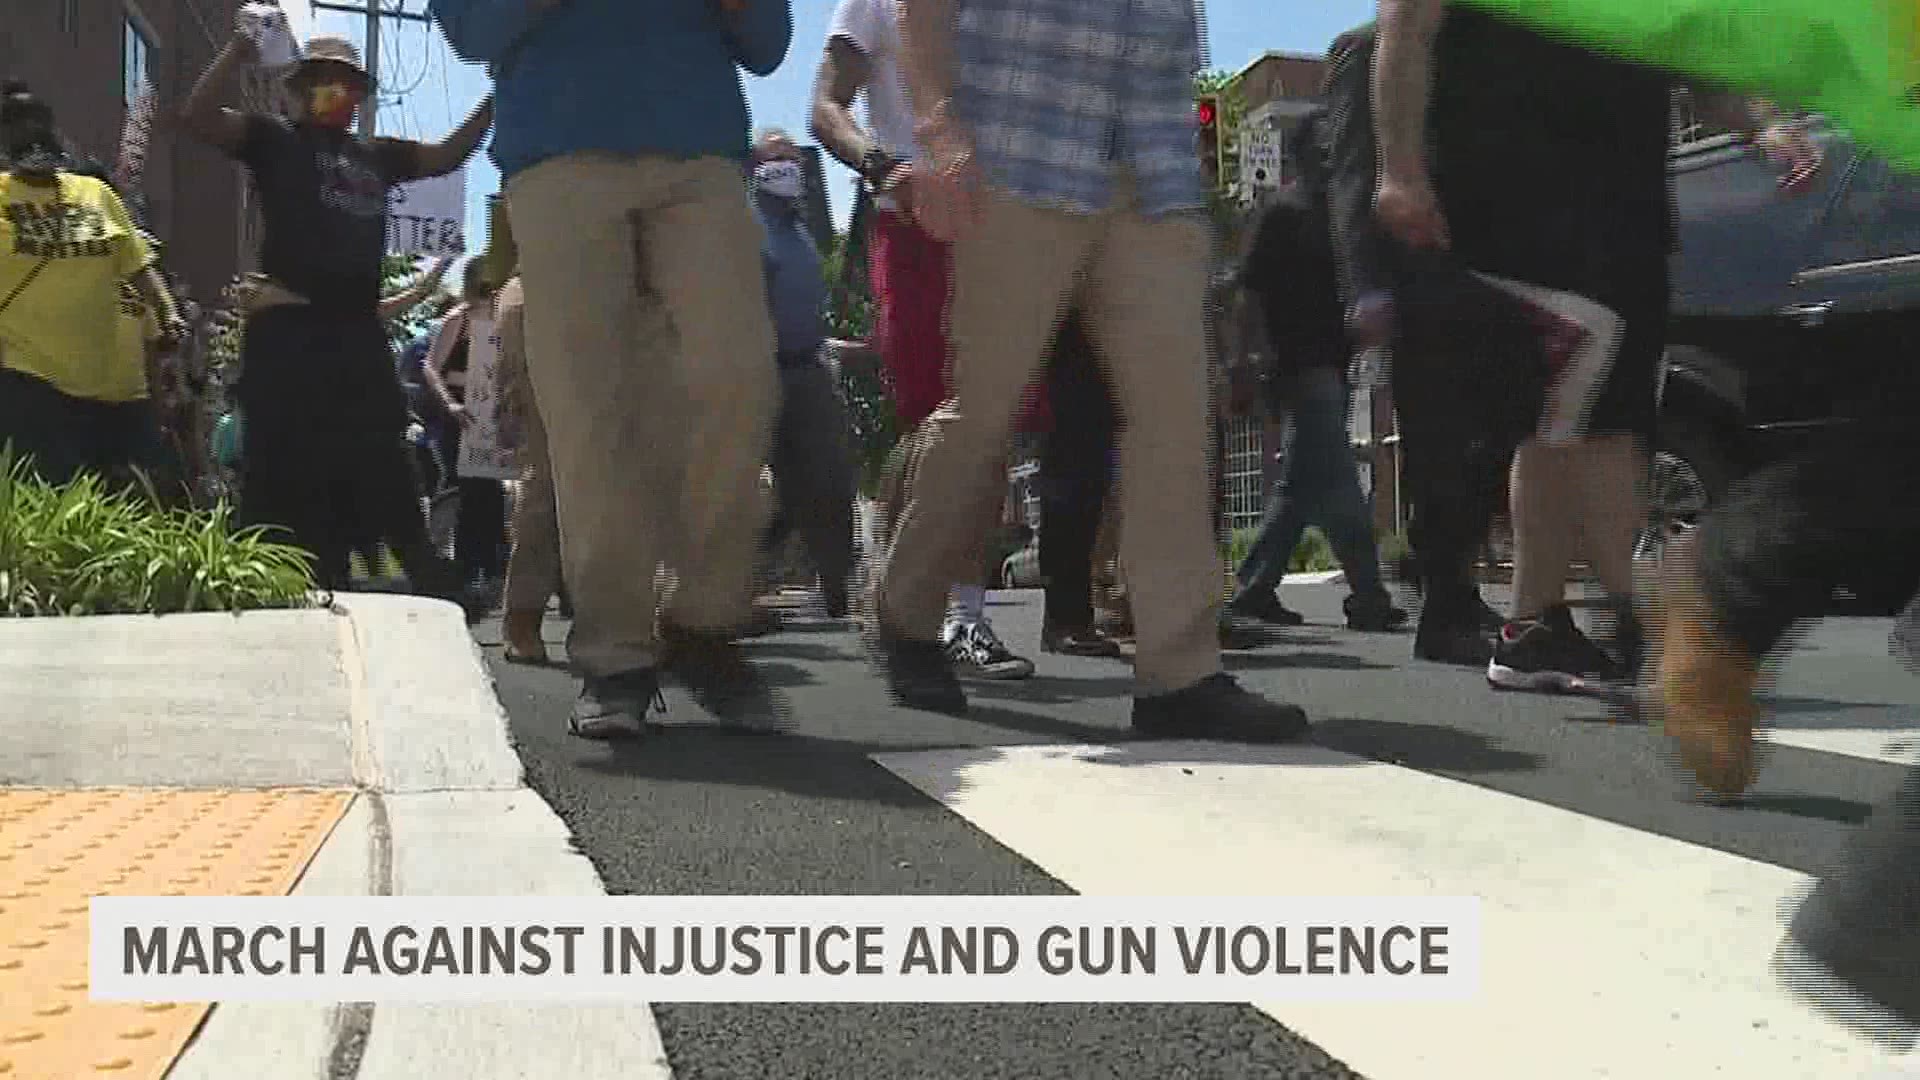 For the second year in a row, people will march against injustice and gun violence in Harrisburg as a rally kicks off at the Capitol Thursday morning.